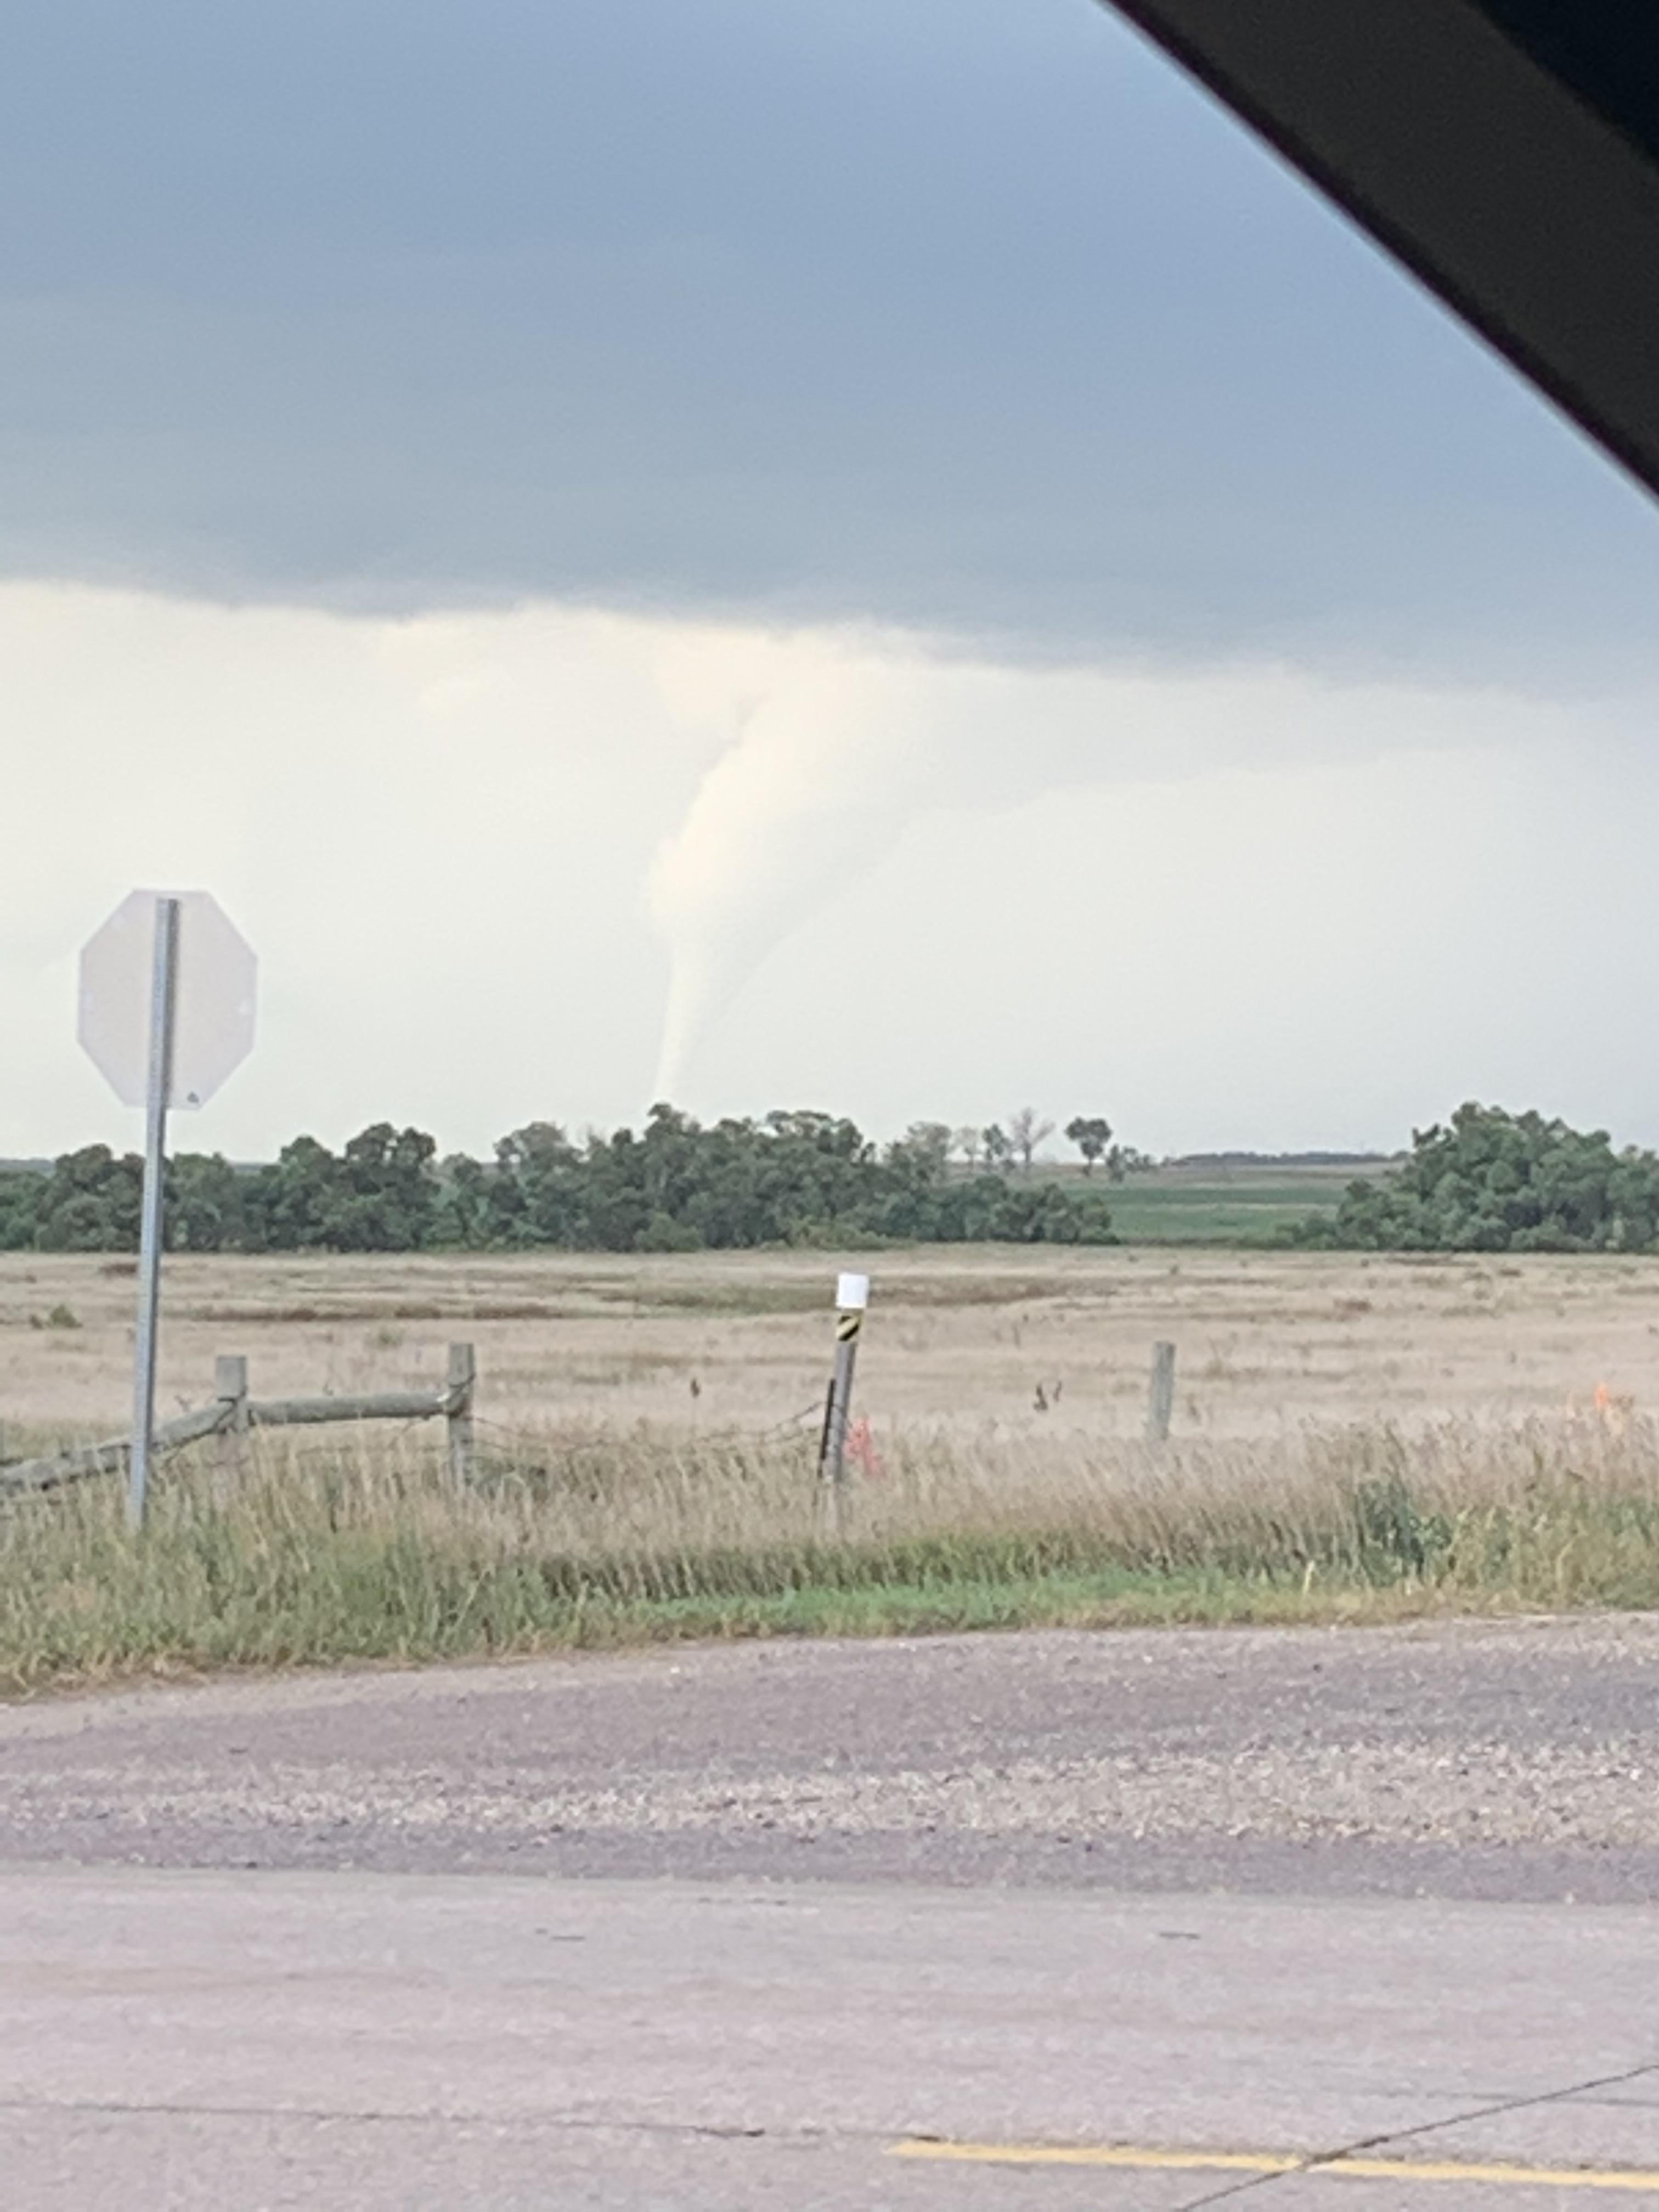 Tornado picture taken at 6:05pm in St. Lawrence, SD by Noah BeckÂ 